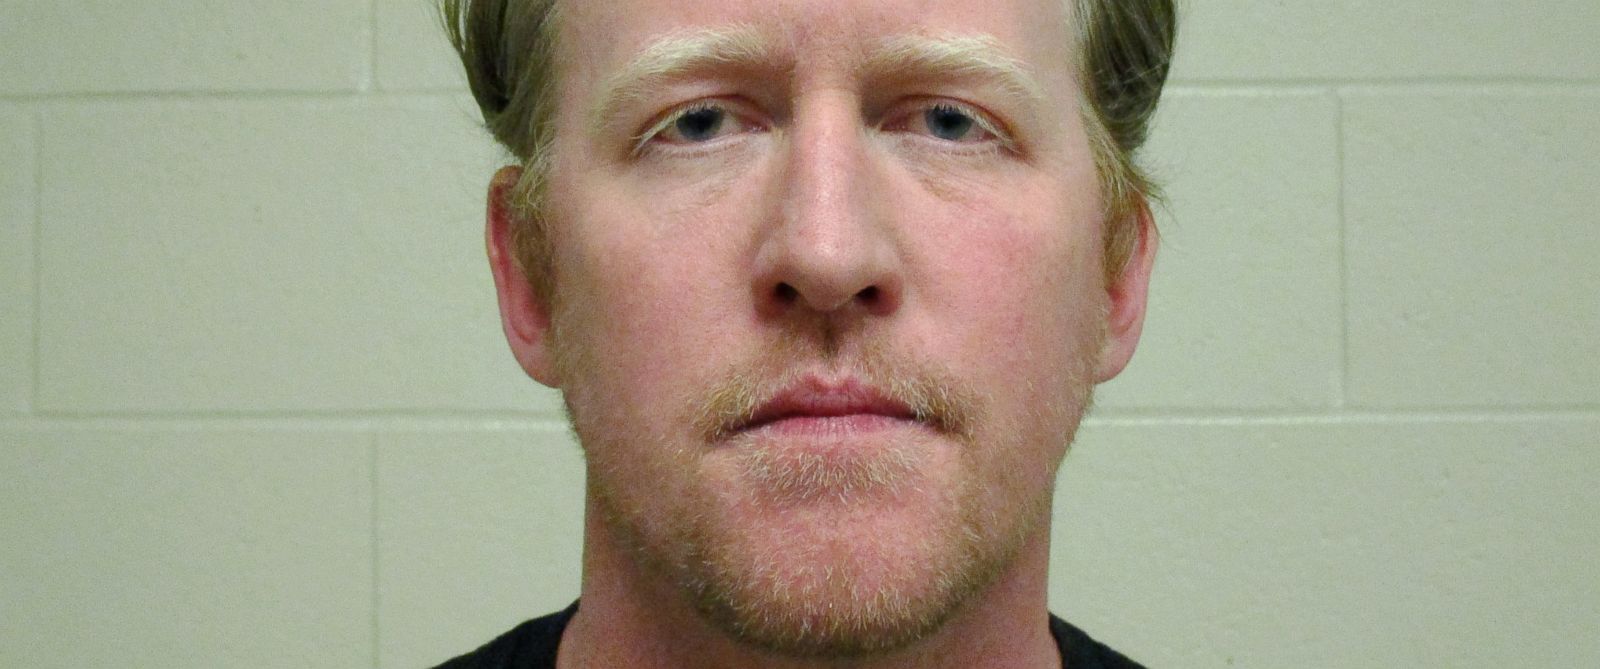 Navy SEAL Who Claimed to Kill Bin Laden Arrested for DUI